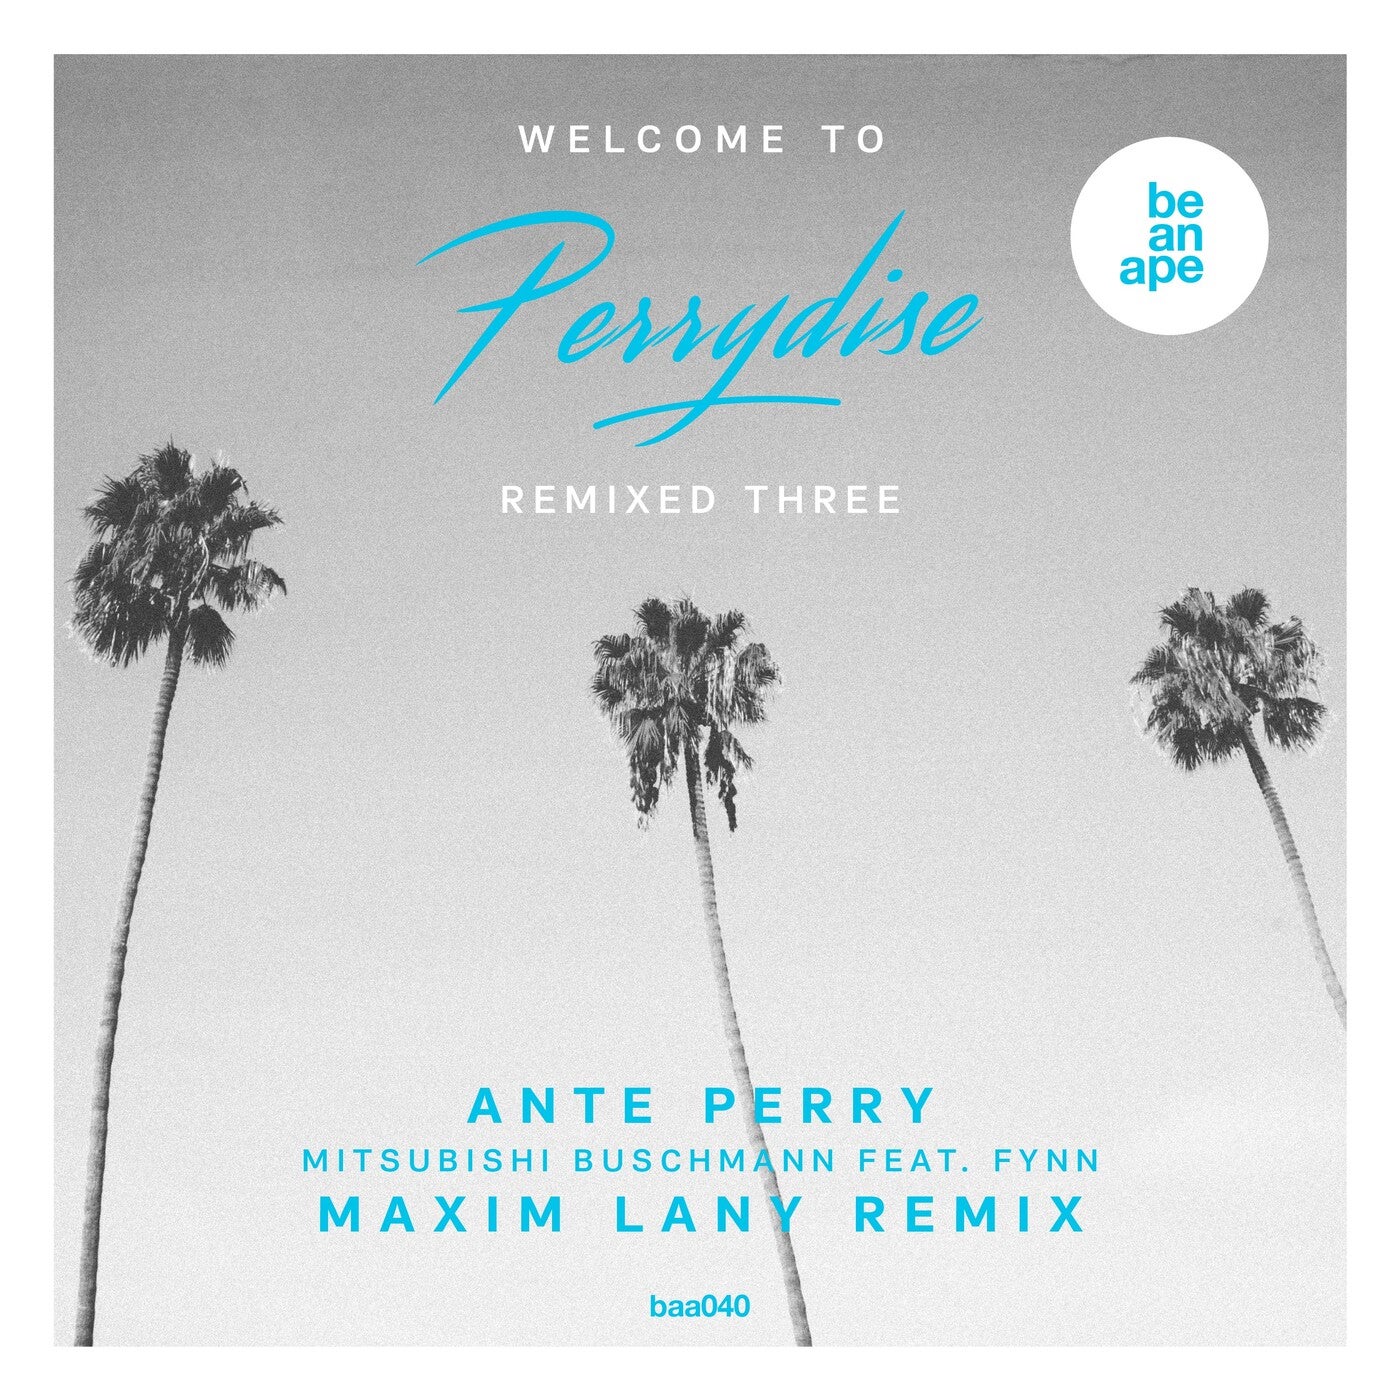 Ante Perry - Welcome To Perrydise Remixed Three (Maxim Lany Remix) [4056813193626]